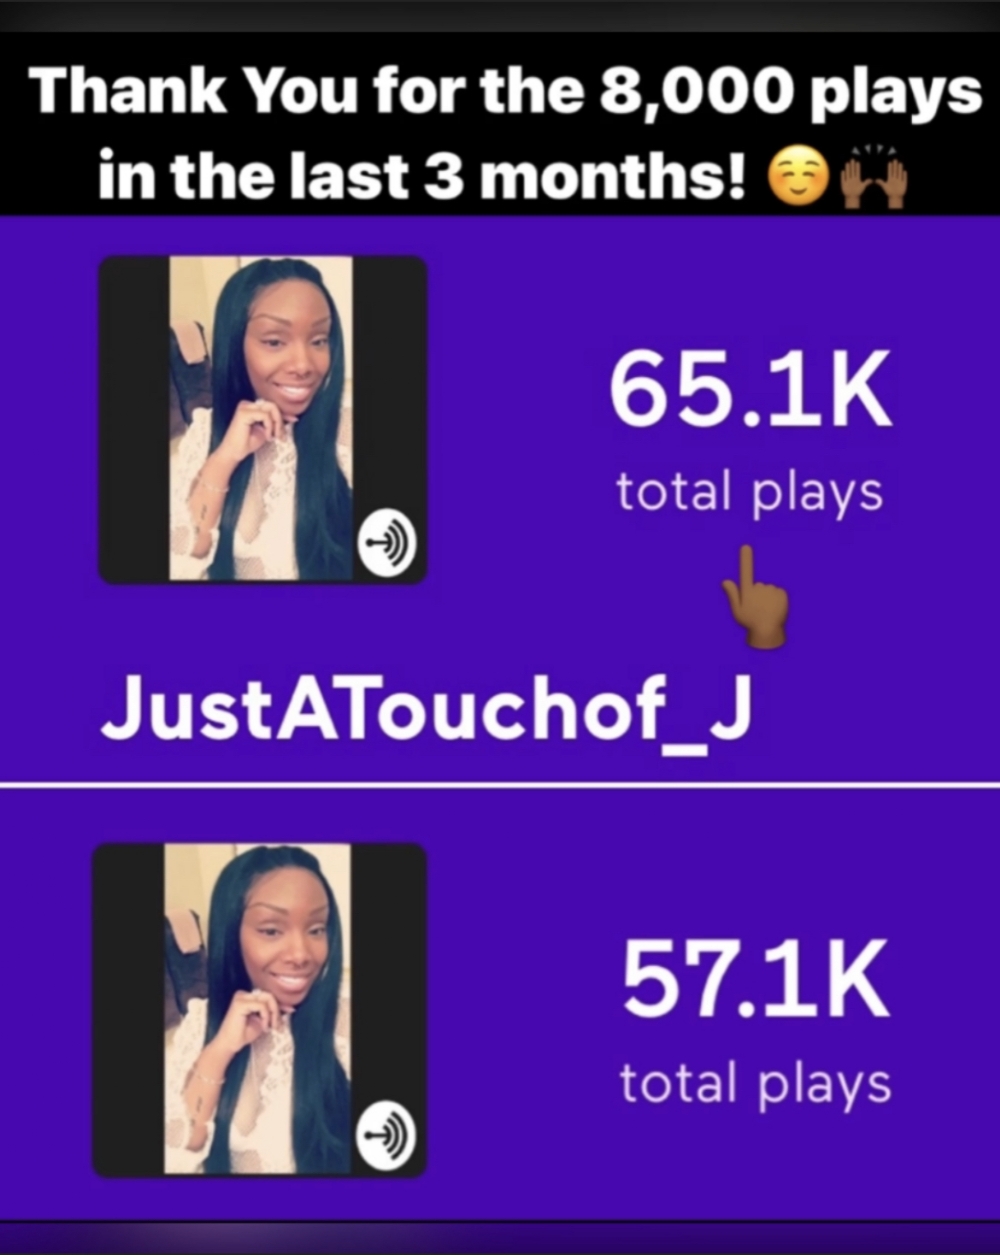 It's #JustATouchof_J 's Poppin Podcast Thursday's! Thank You For The 8,000 Plays!